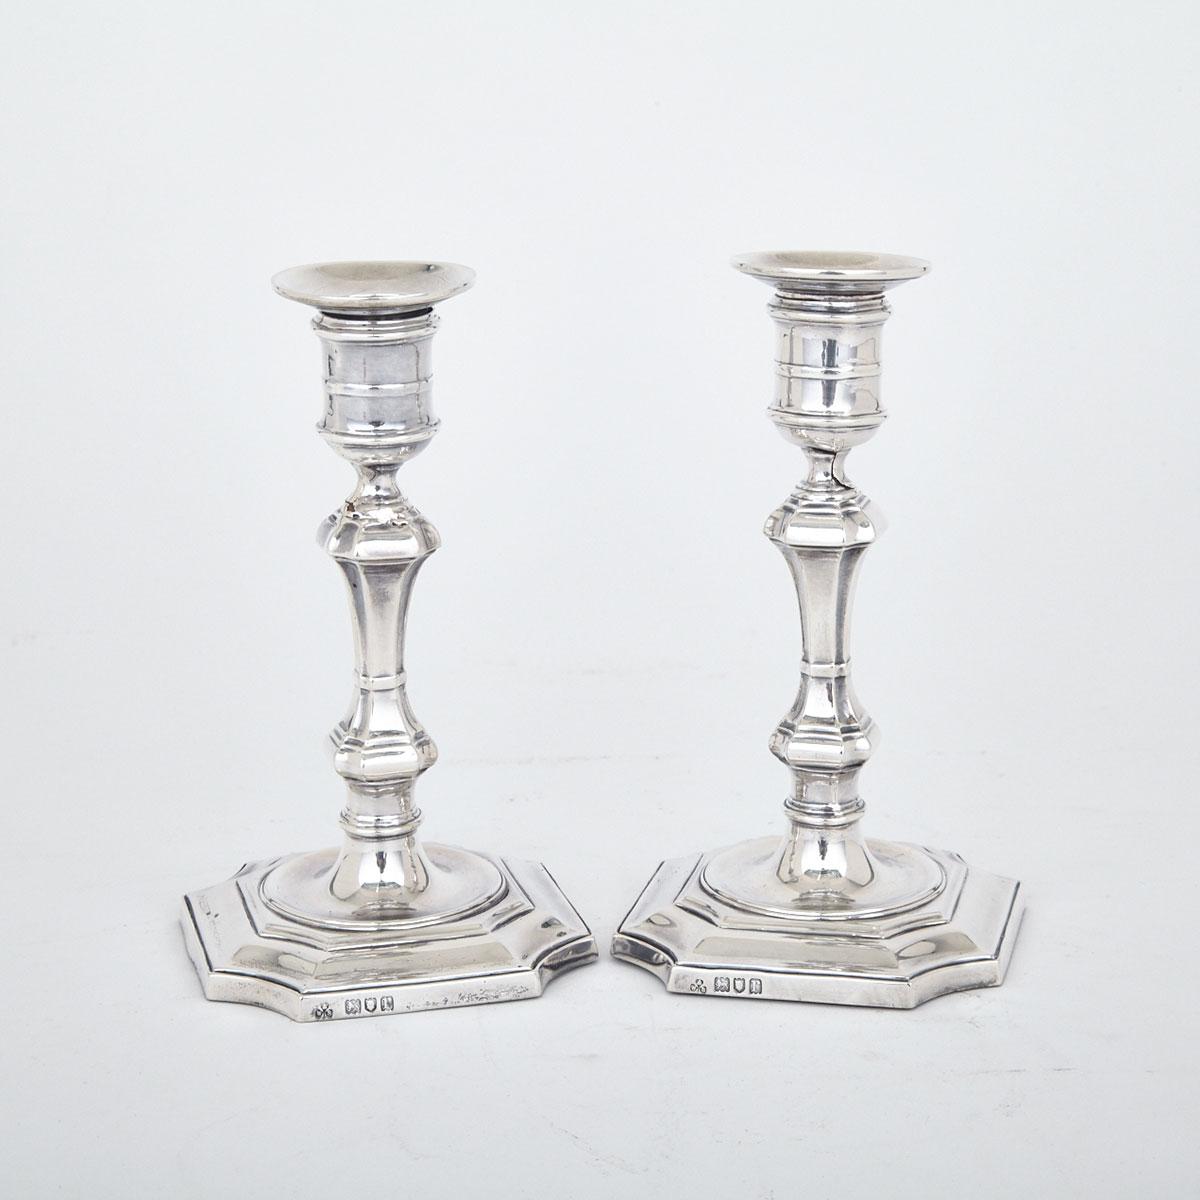 Pair of English Silver Candlesticks, West & Son (of Dublin), London, 1912